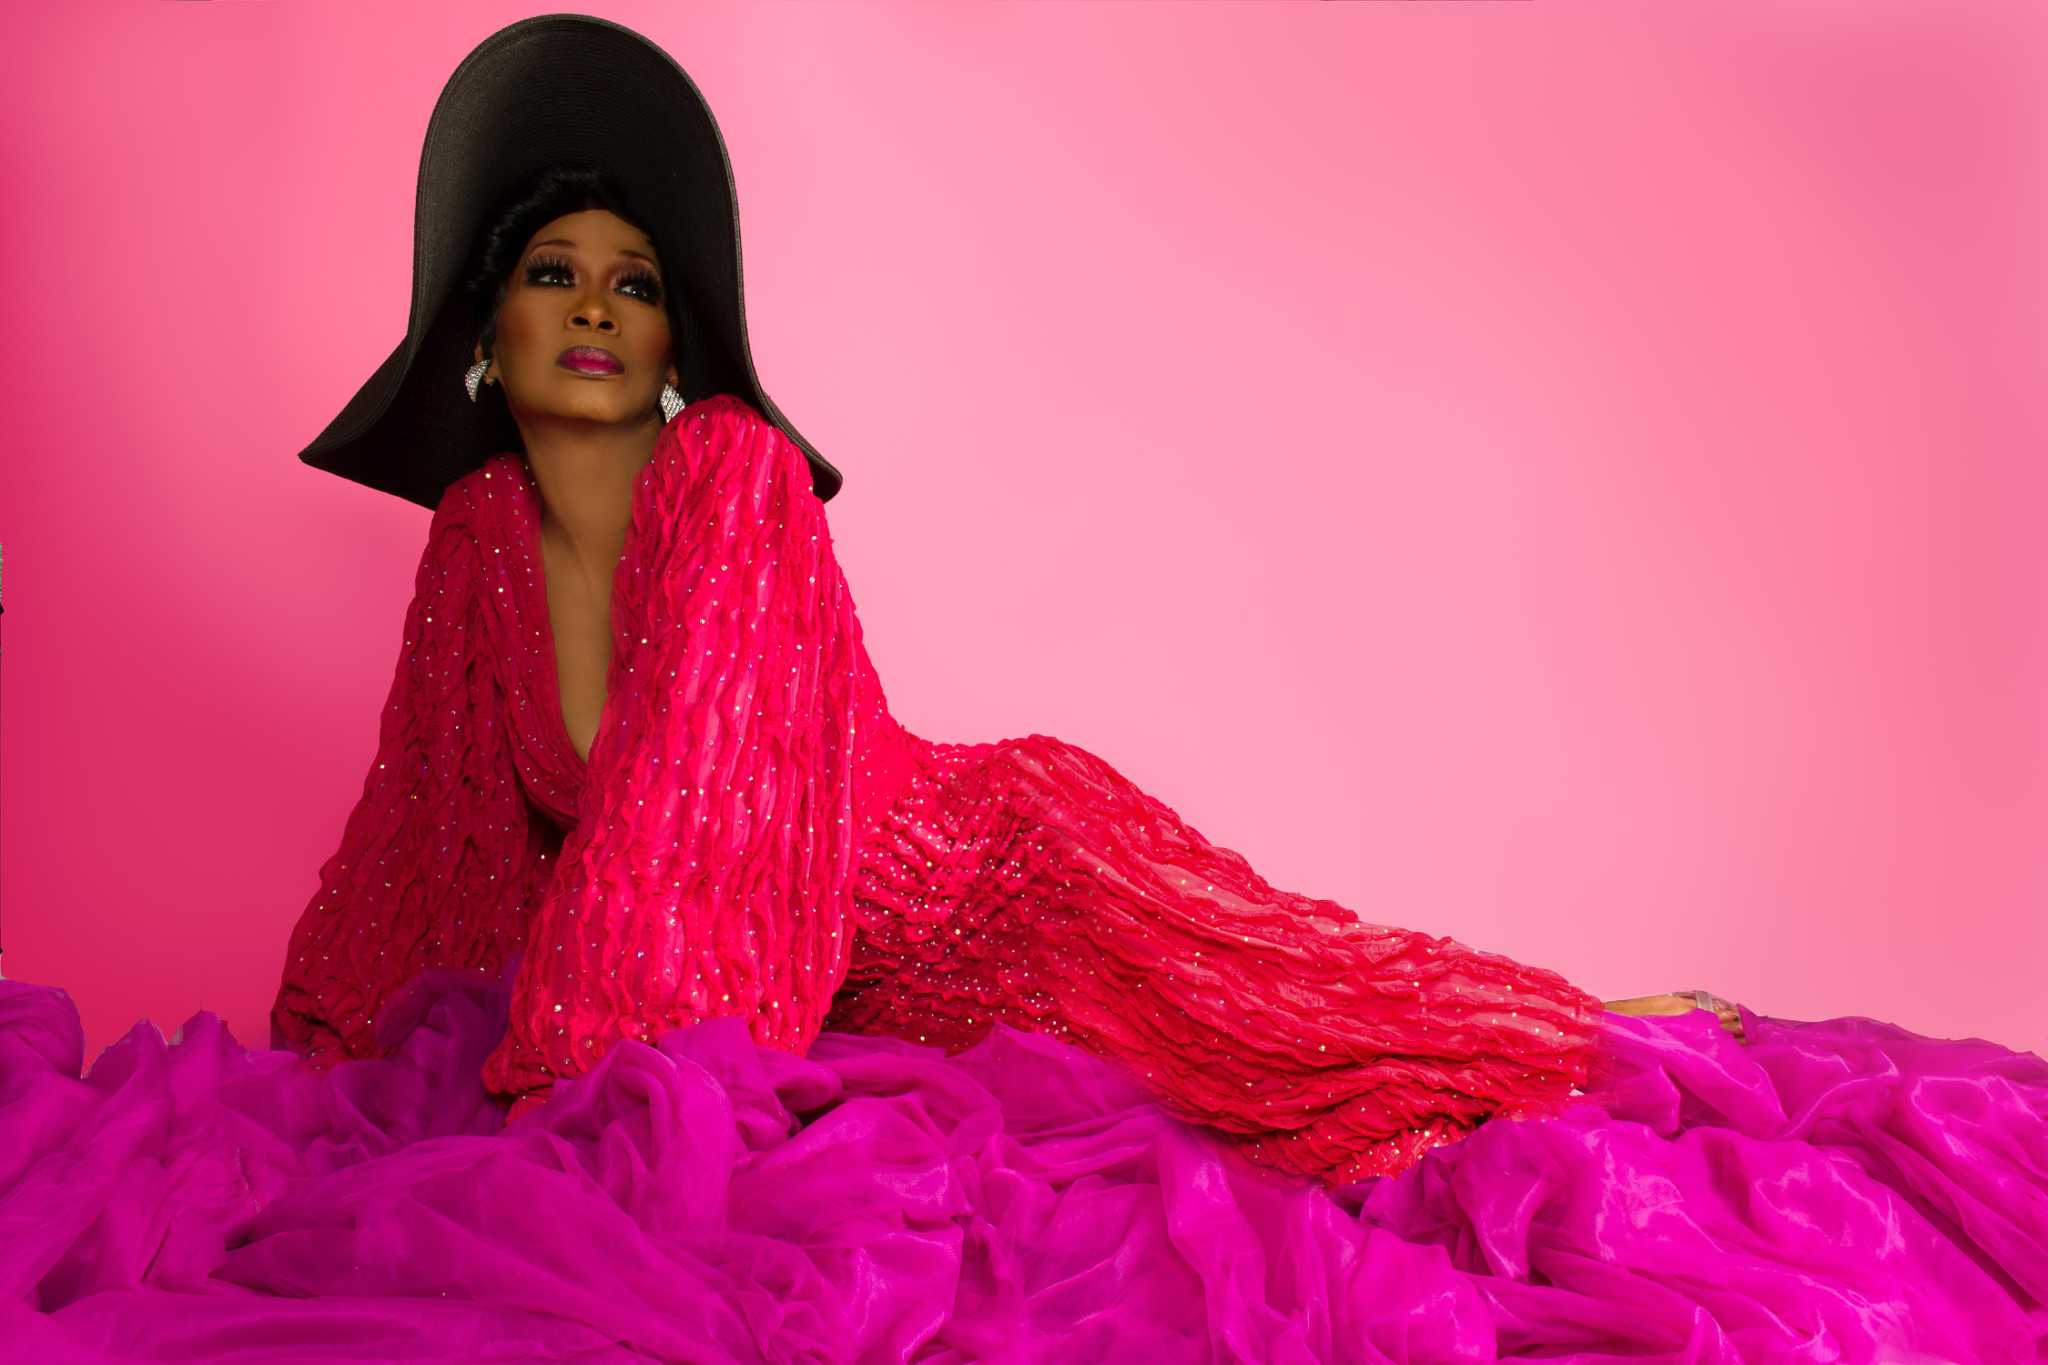 Tommie Ross’ starring role is that of Houston’s transgender icon and mentor